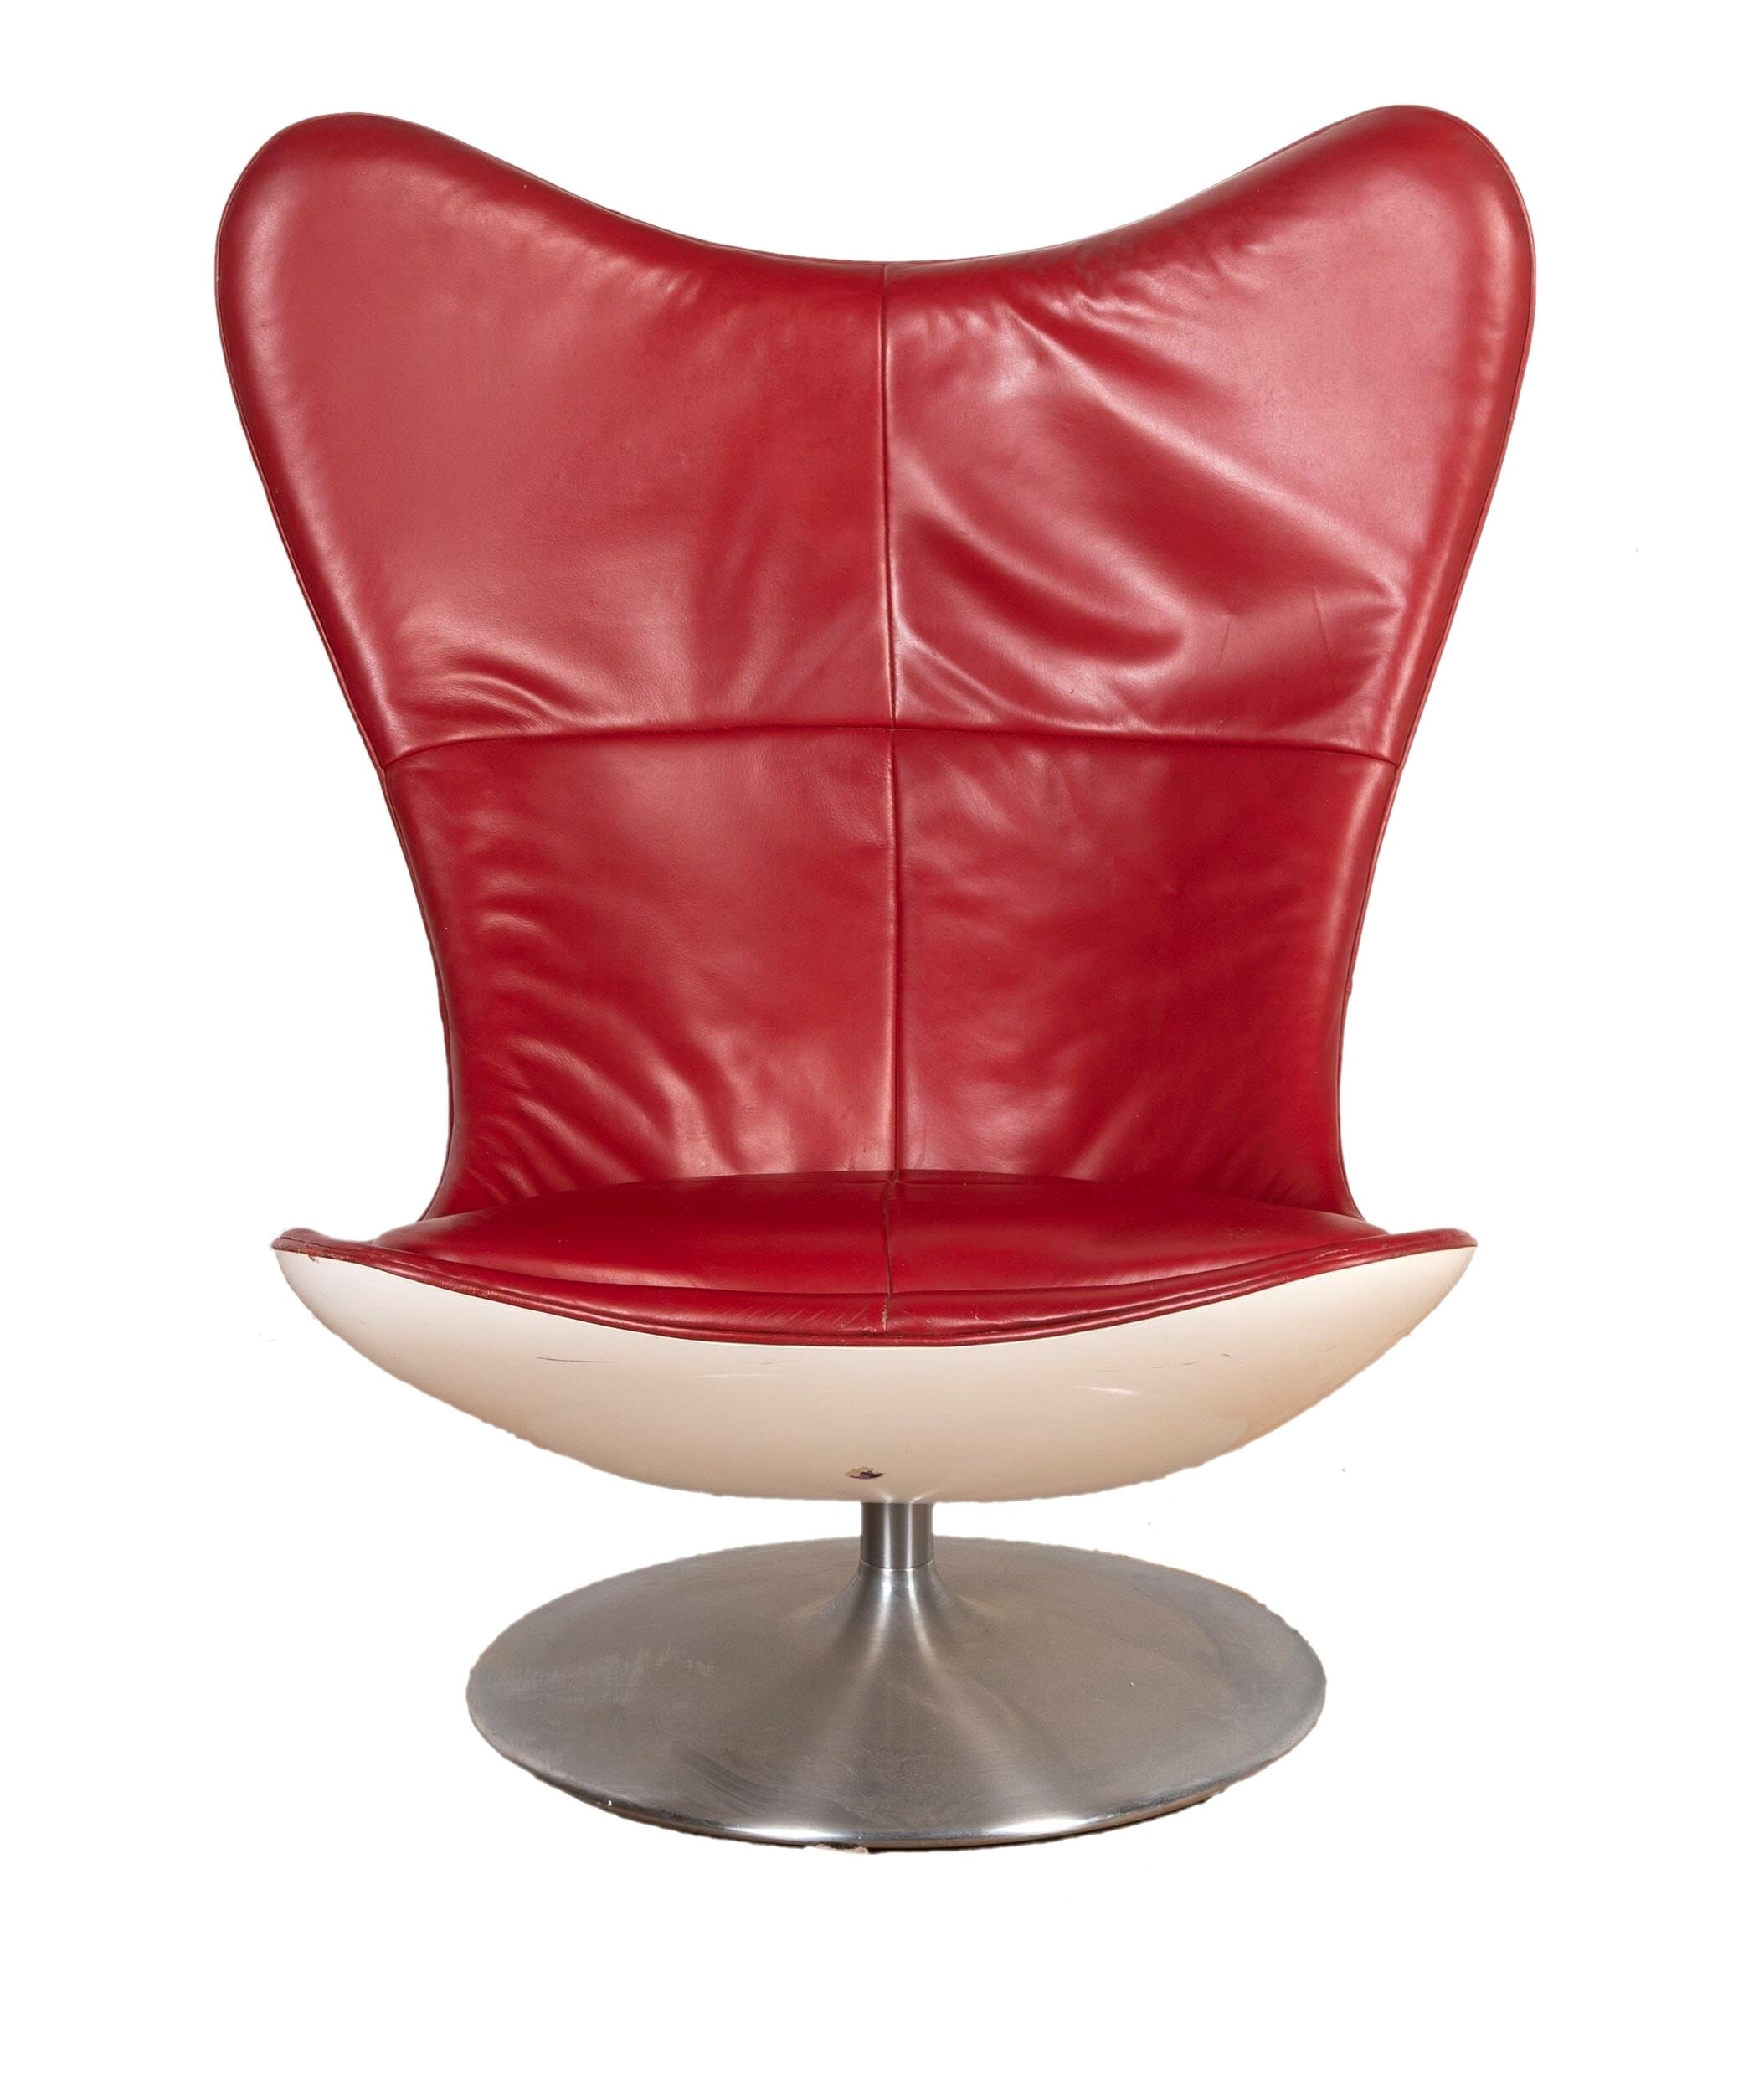 Sir Terence Conran (1931-2020) - Glove chair, red leather upholstery on a polished fibreglass, 103cm